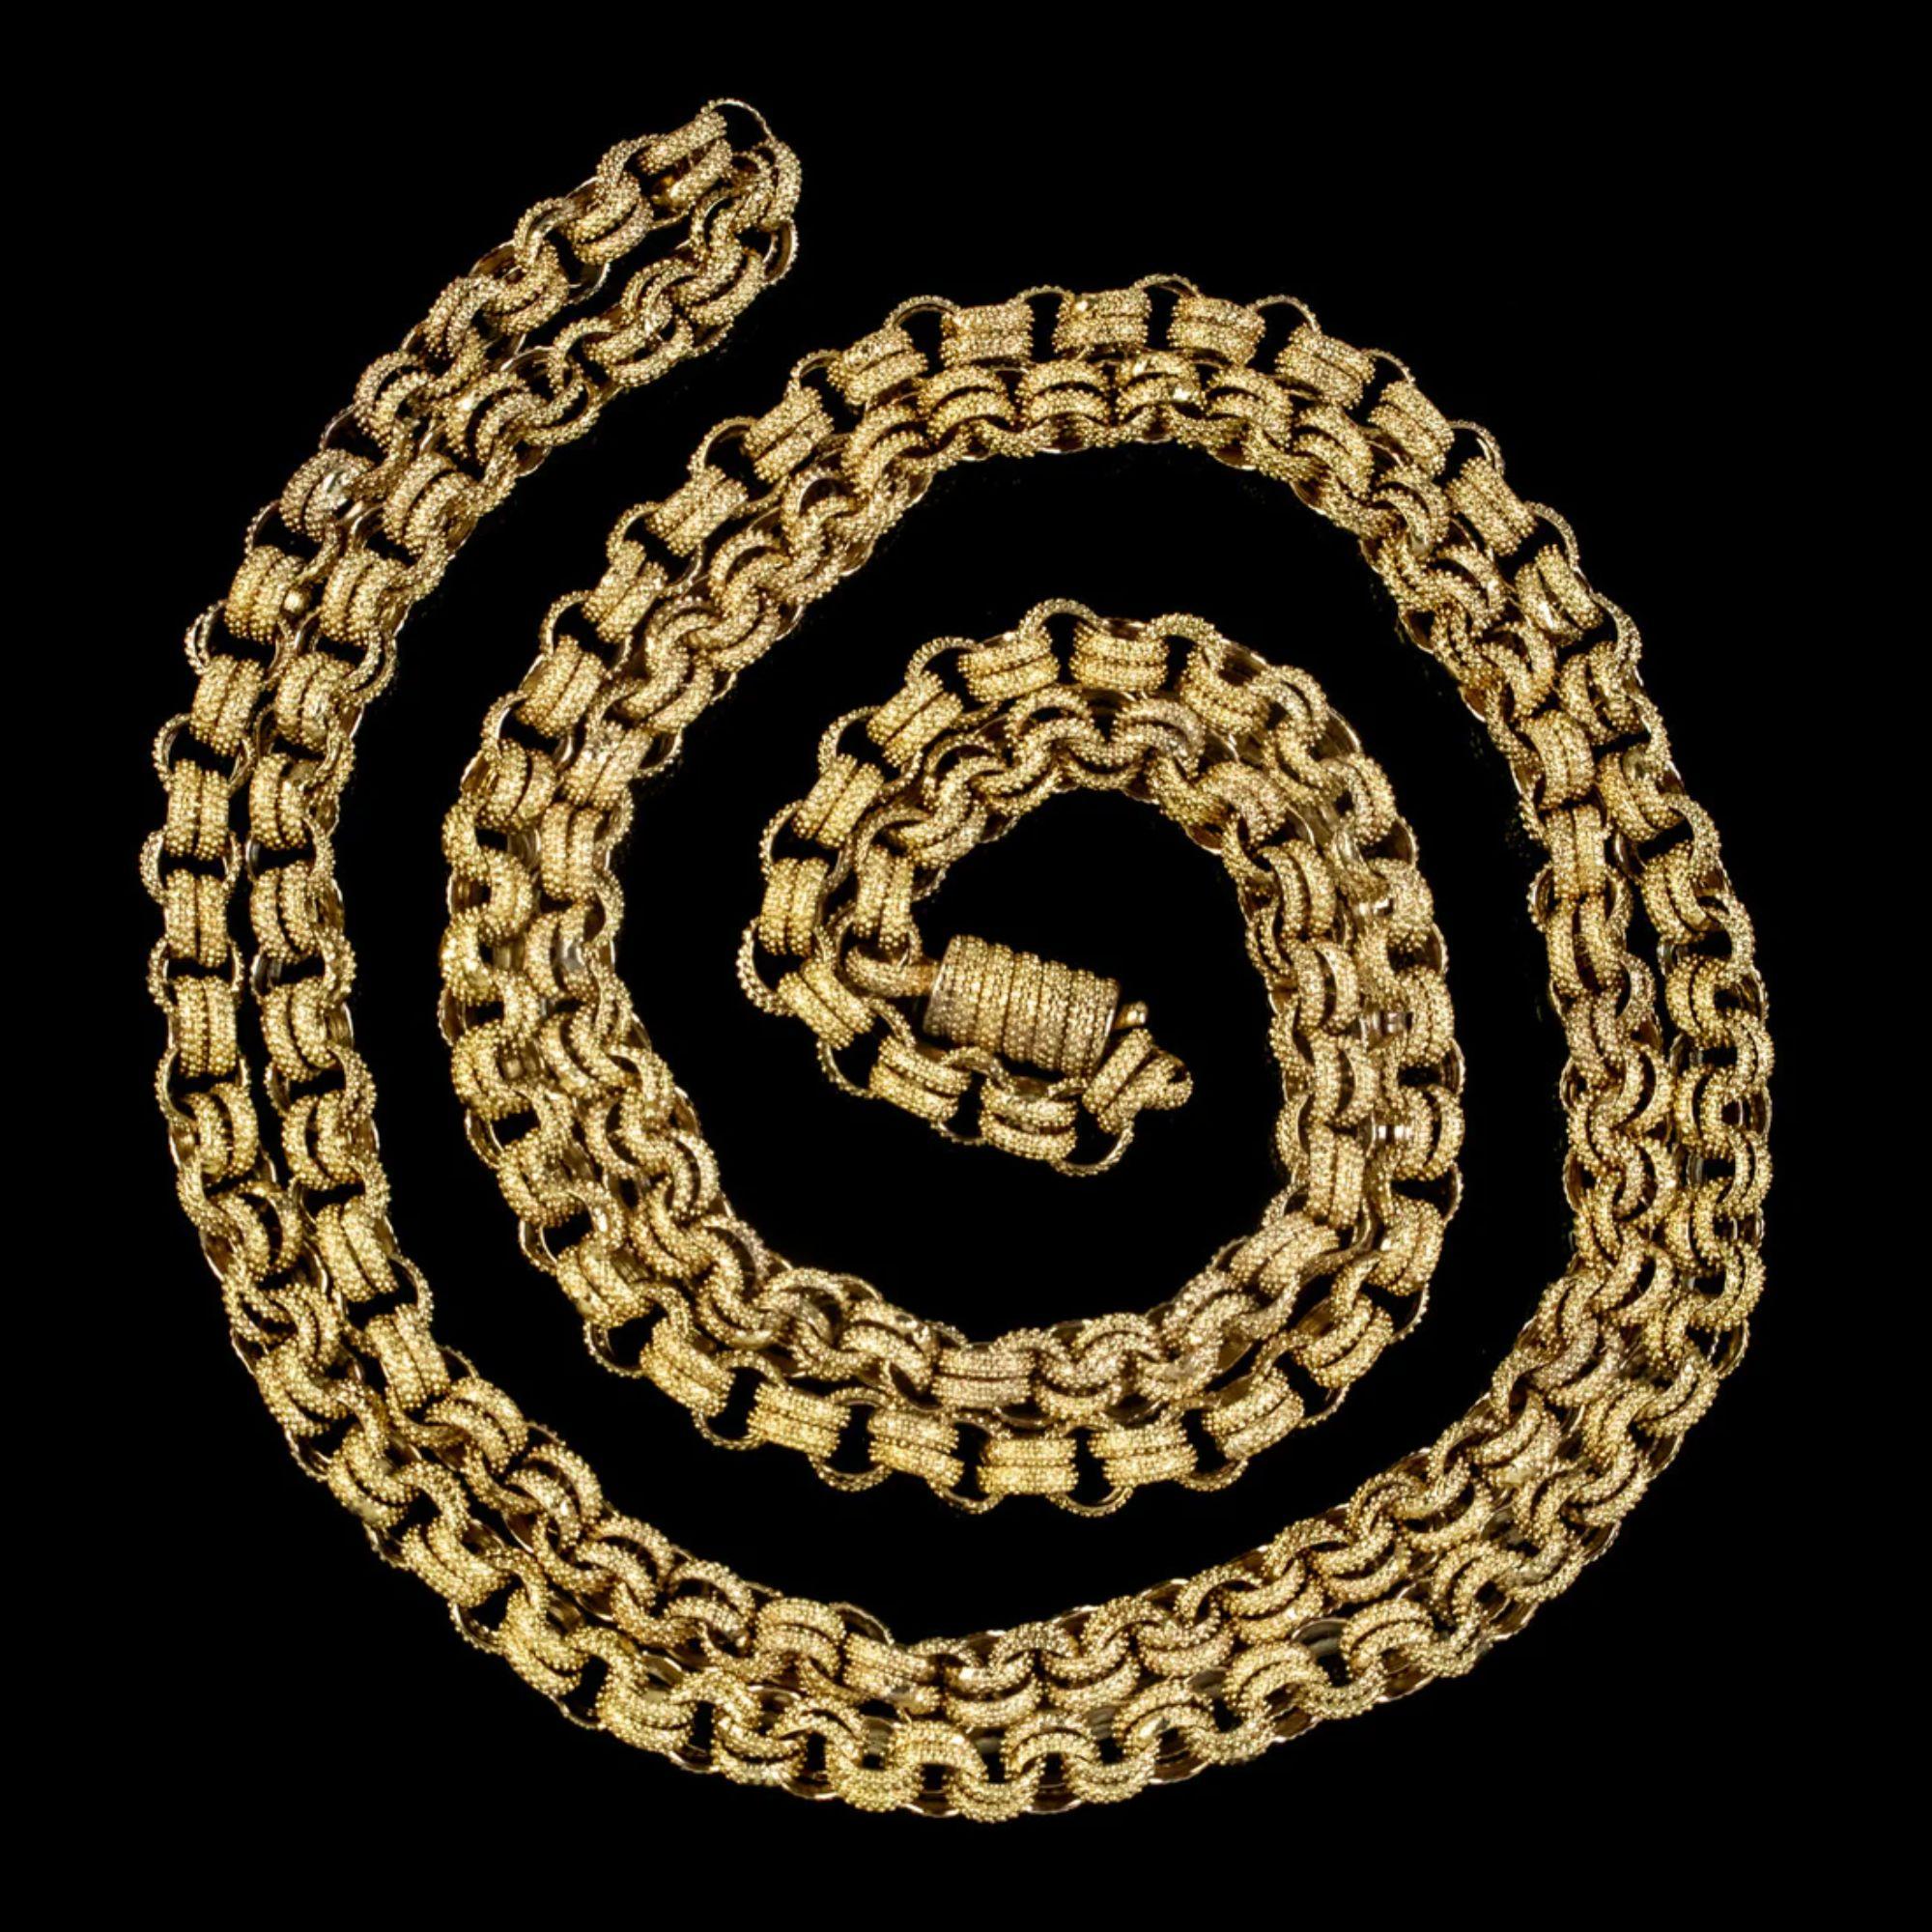 A grand antique Georgian chain beautifully preserved from the early 19th Century. It’s made up of pinchbeck cable links, gilded in 18ct yellow gold with a wonderful bumpy texture across the surface.

It measures an impressive 39 inches in length and